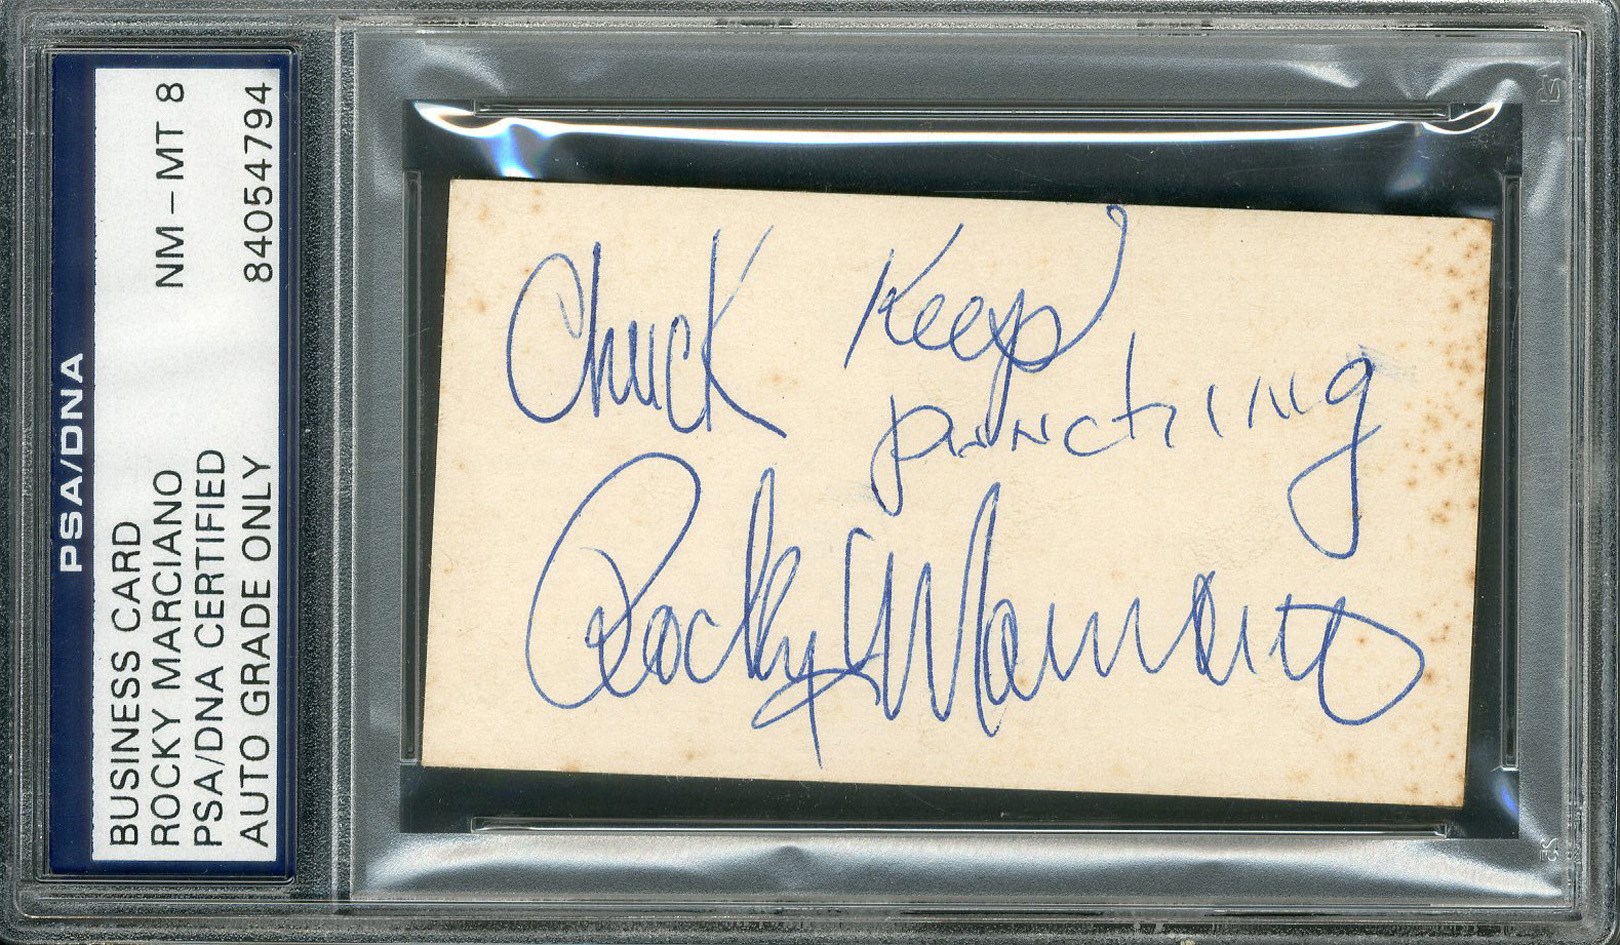 Muhammad Ali & Boxing - Rocky Marciano Signed Business Card (PSA 8)